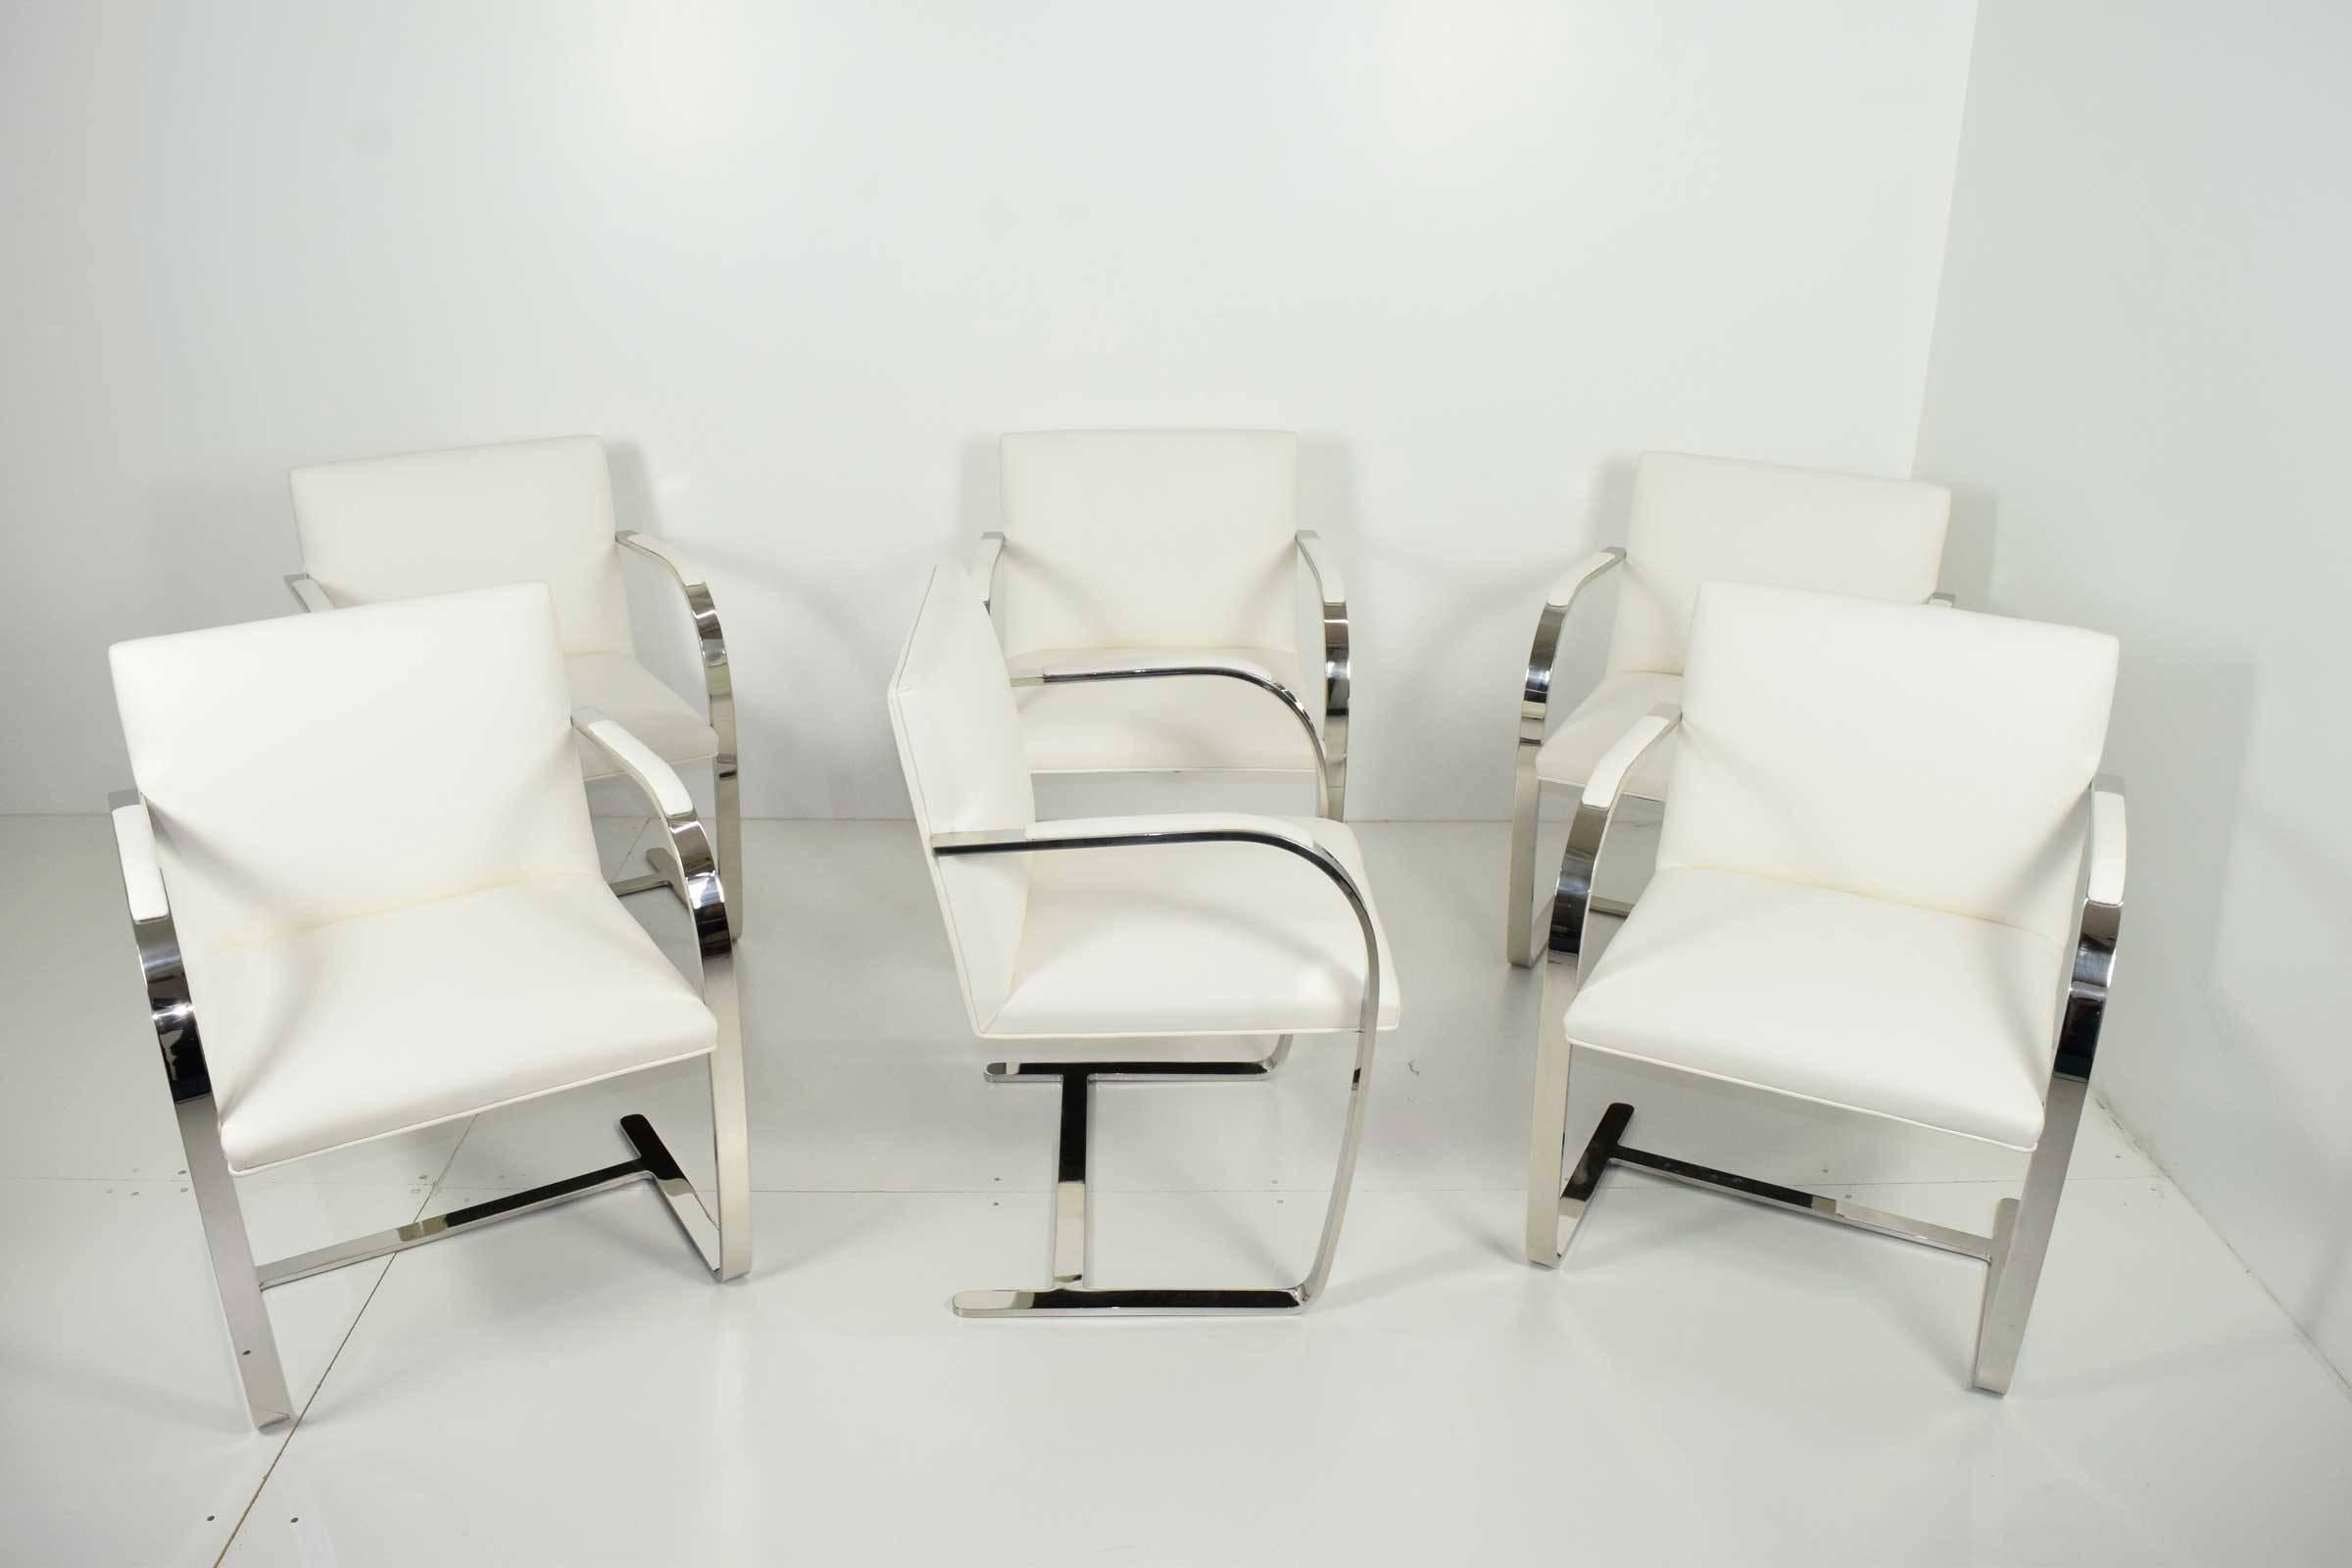 Newly polished stainless steel and white leather upholstery. Six Brno chairs by Mies van der Rohe for Knoll. Ready to go!!!